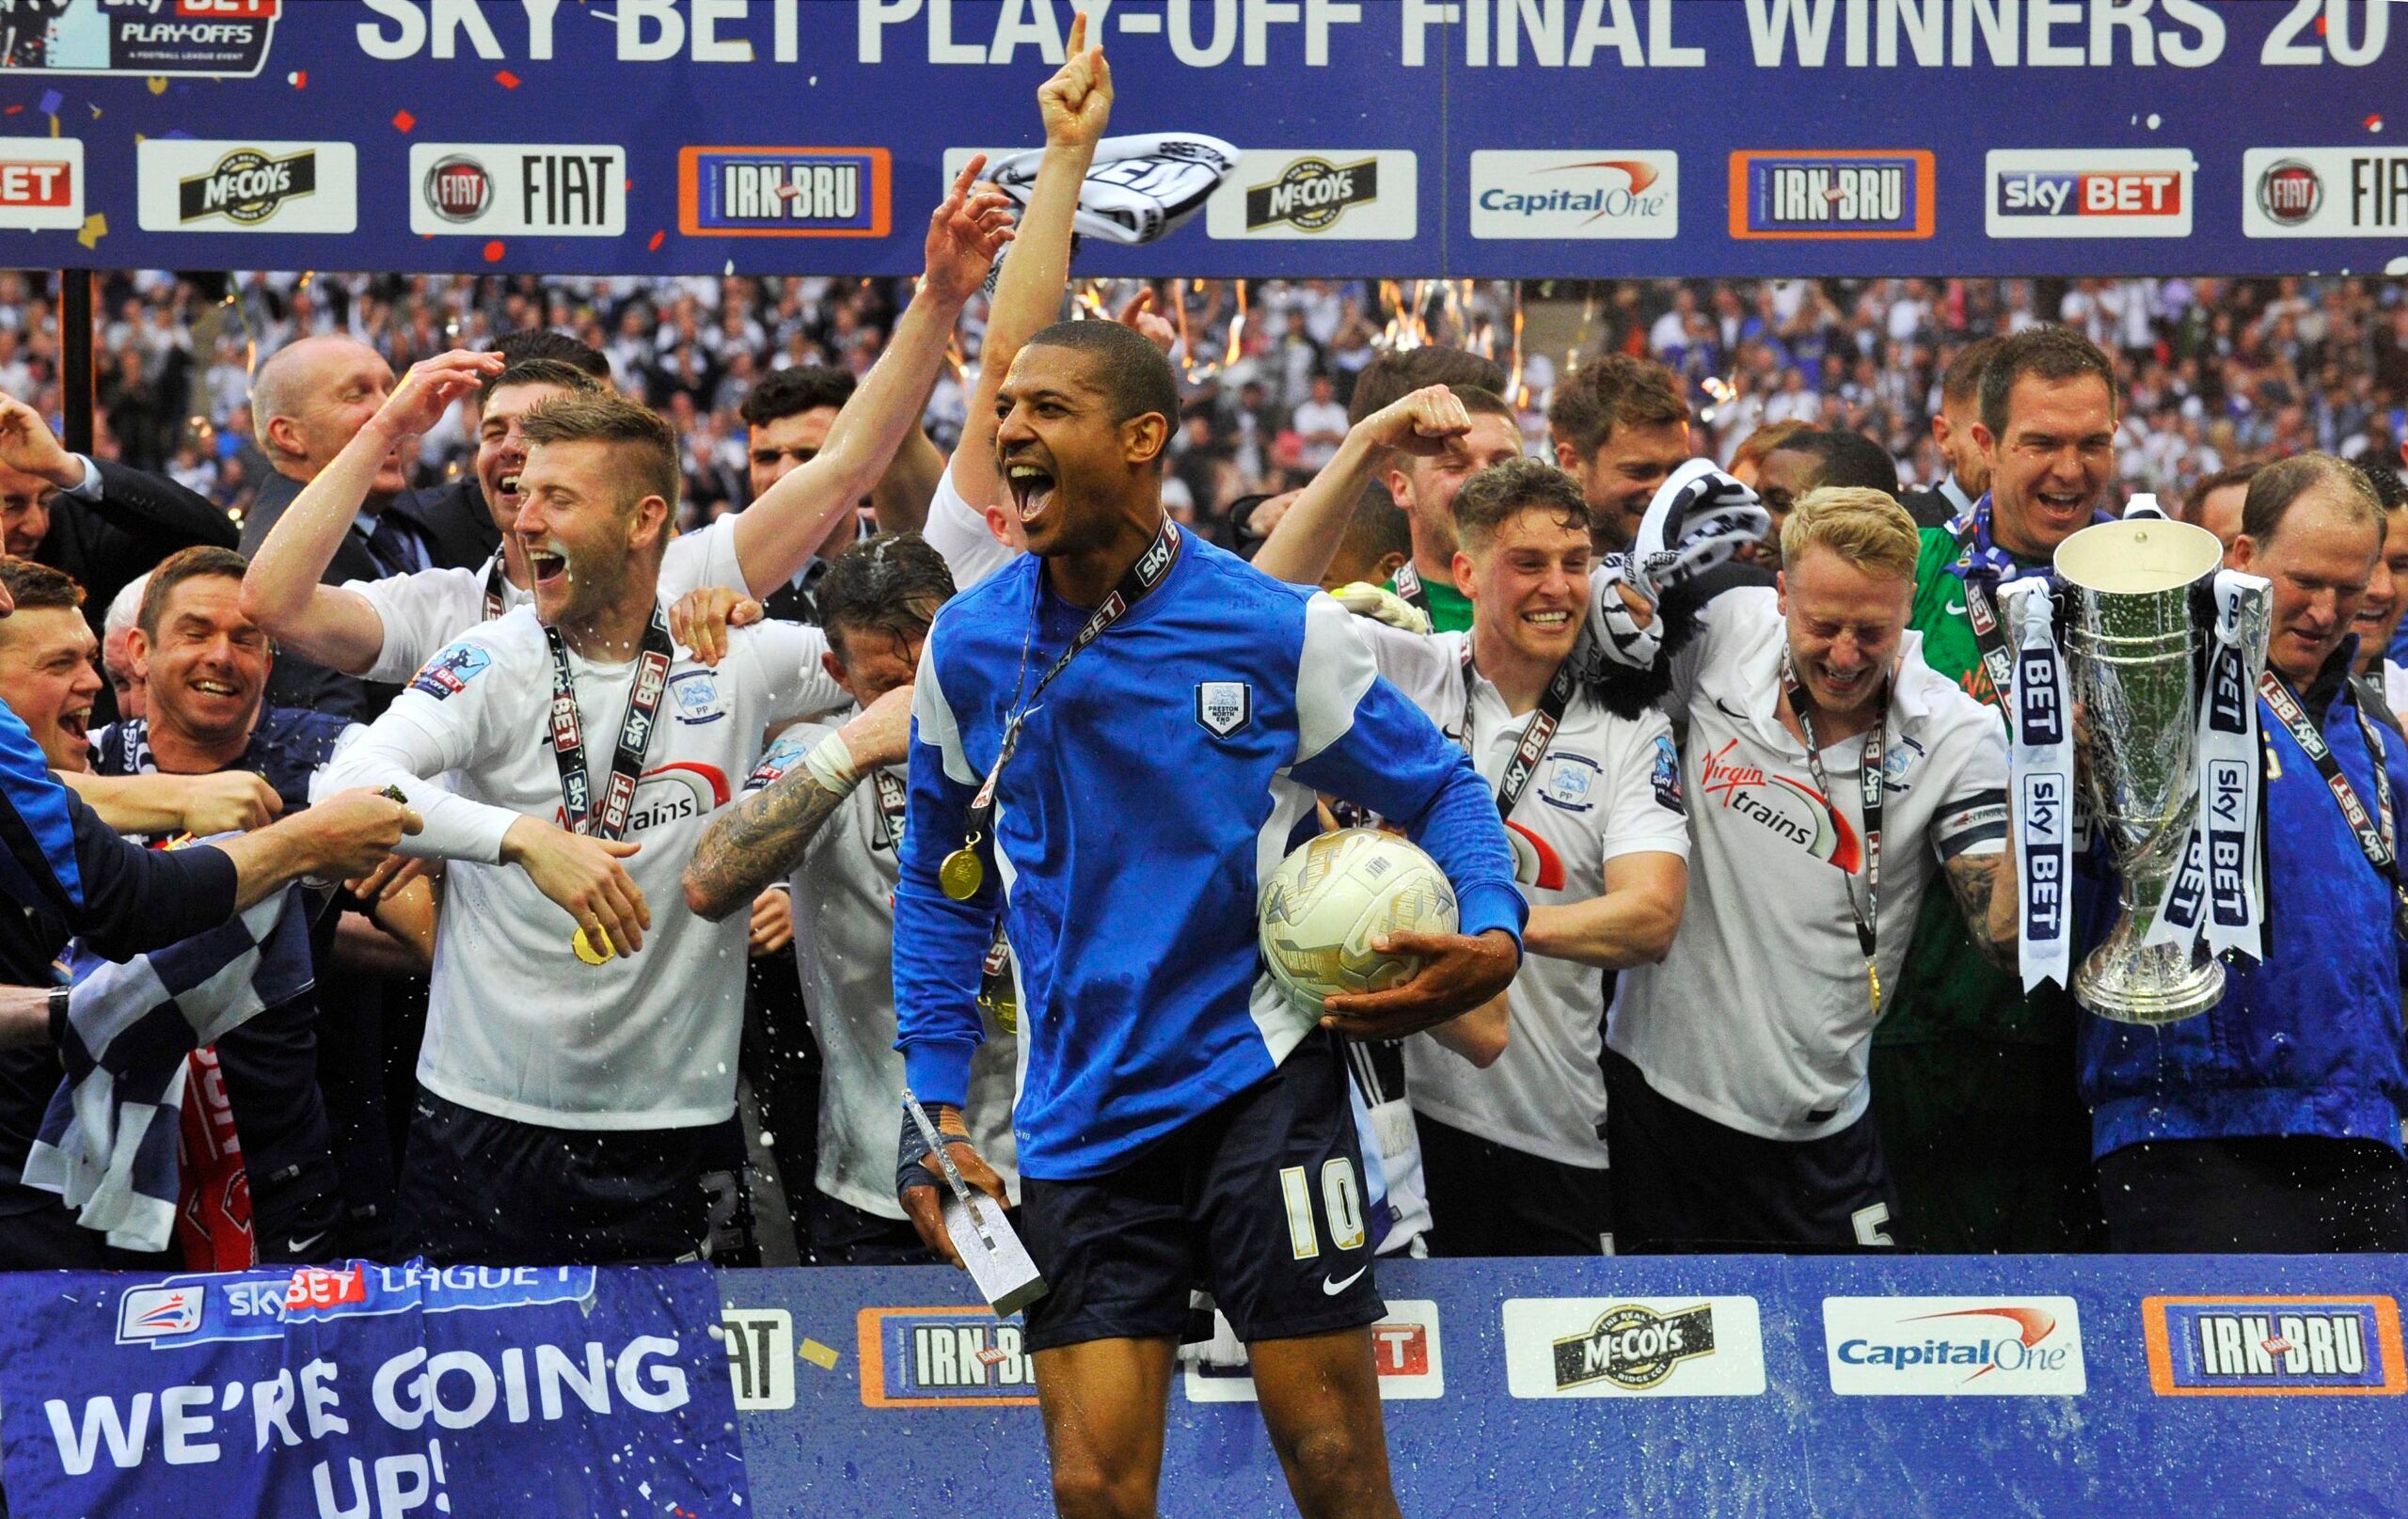 Football - Preston North End v Swindon Town - Sky Bet Football League One Play-Off Final - Wembley Stadium - 24/5/15 
Preston North End celebrate winning the final and promotion 
Mandatory Credit: Action Images / Rebecca Naden 
Livepic 
EDITORIAL USE ONLY. No use with unauthorized audio, video, data, fixture lists, club/league logos or 